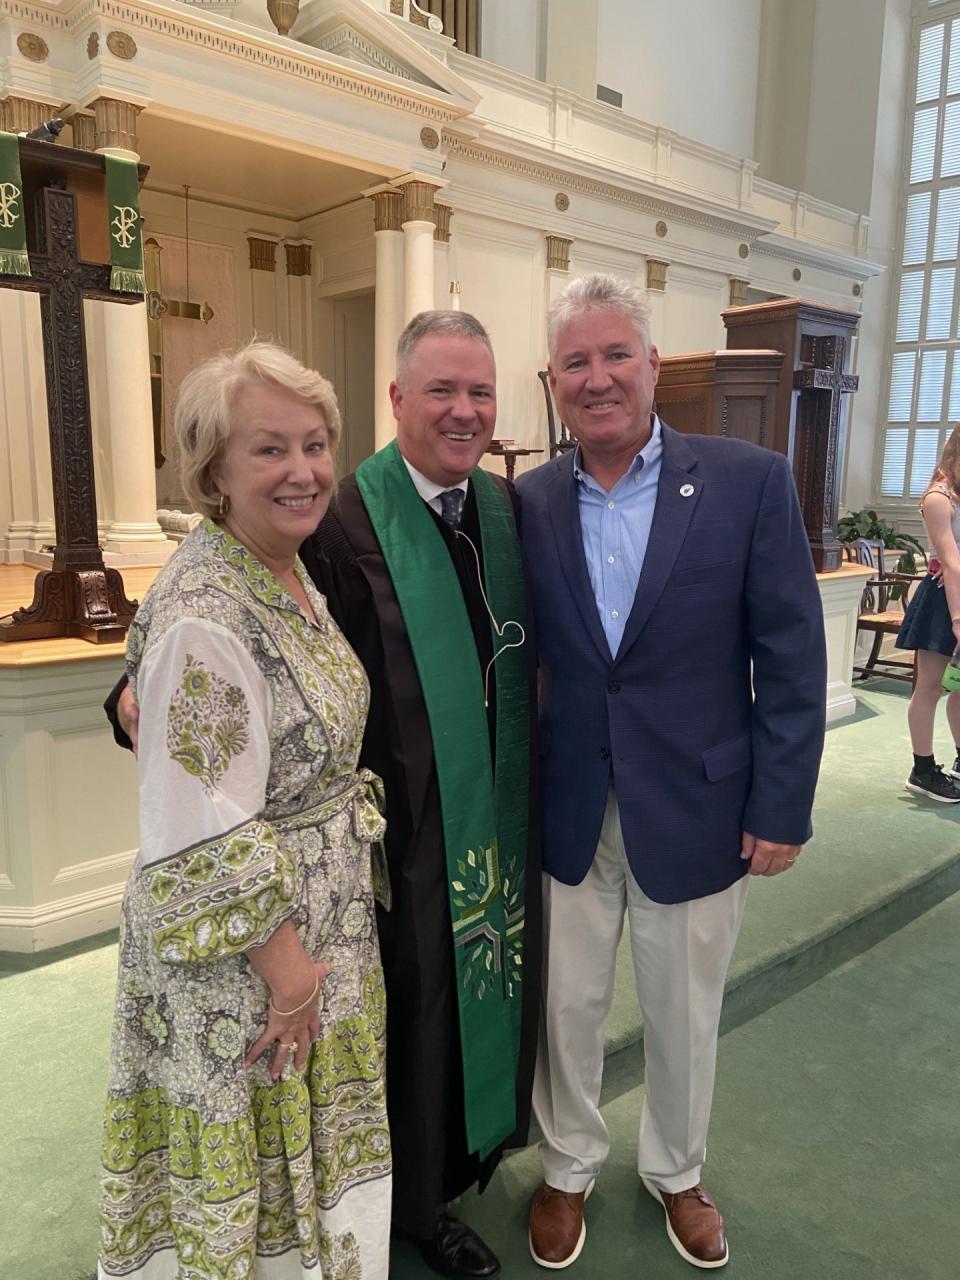 The Rev. Dr. Kyle Reese is flanked by Pastoral Search Committee Chairwoman Nancy Sutton and her husband, Billy.